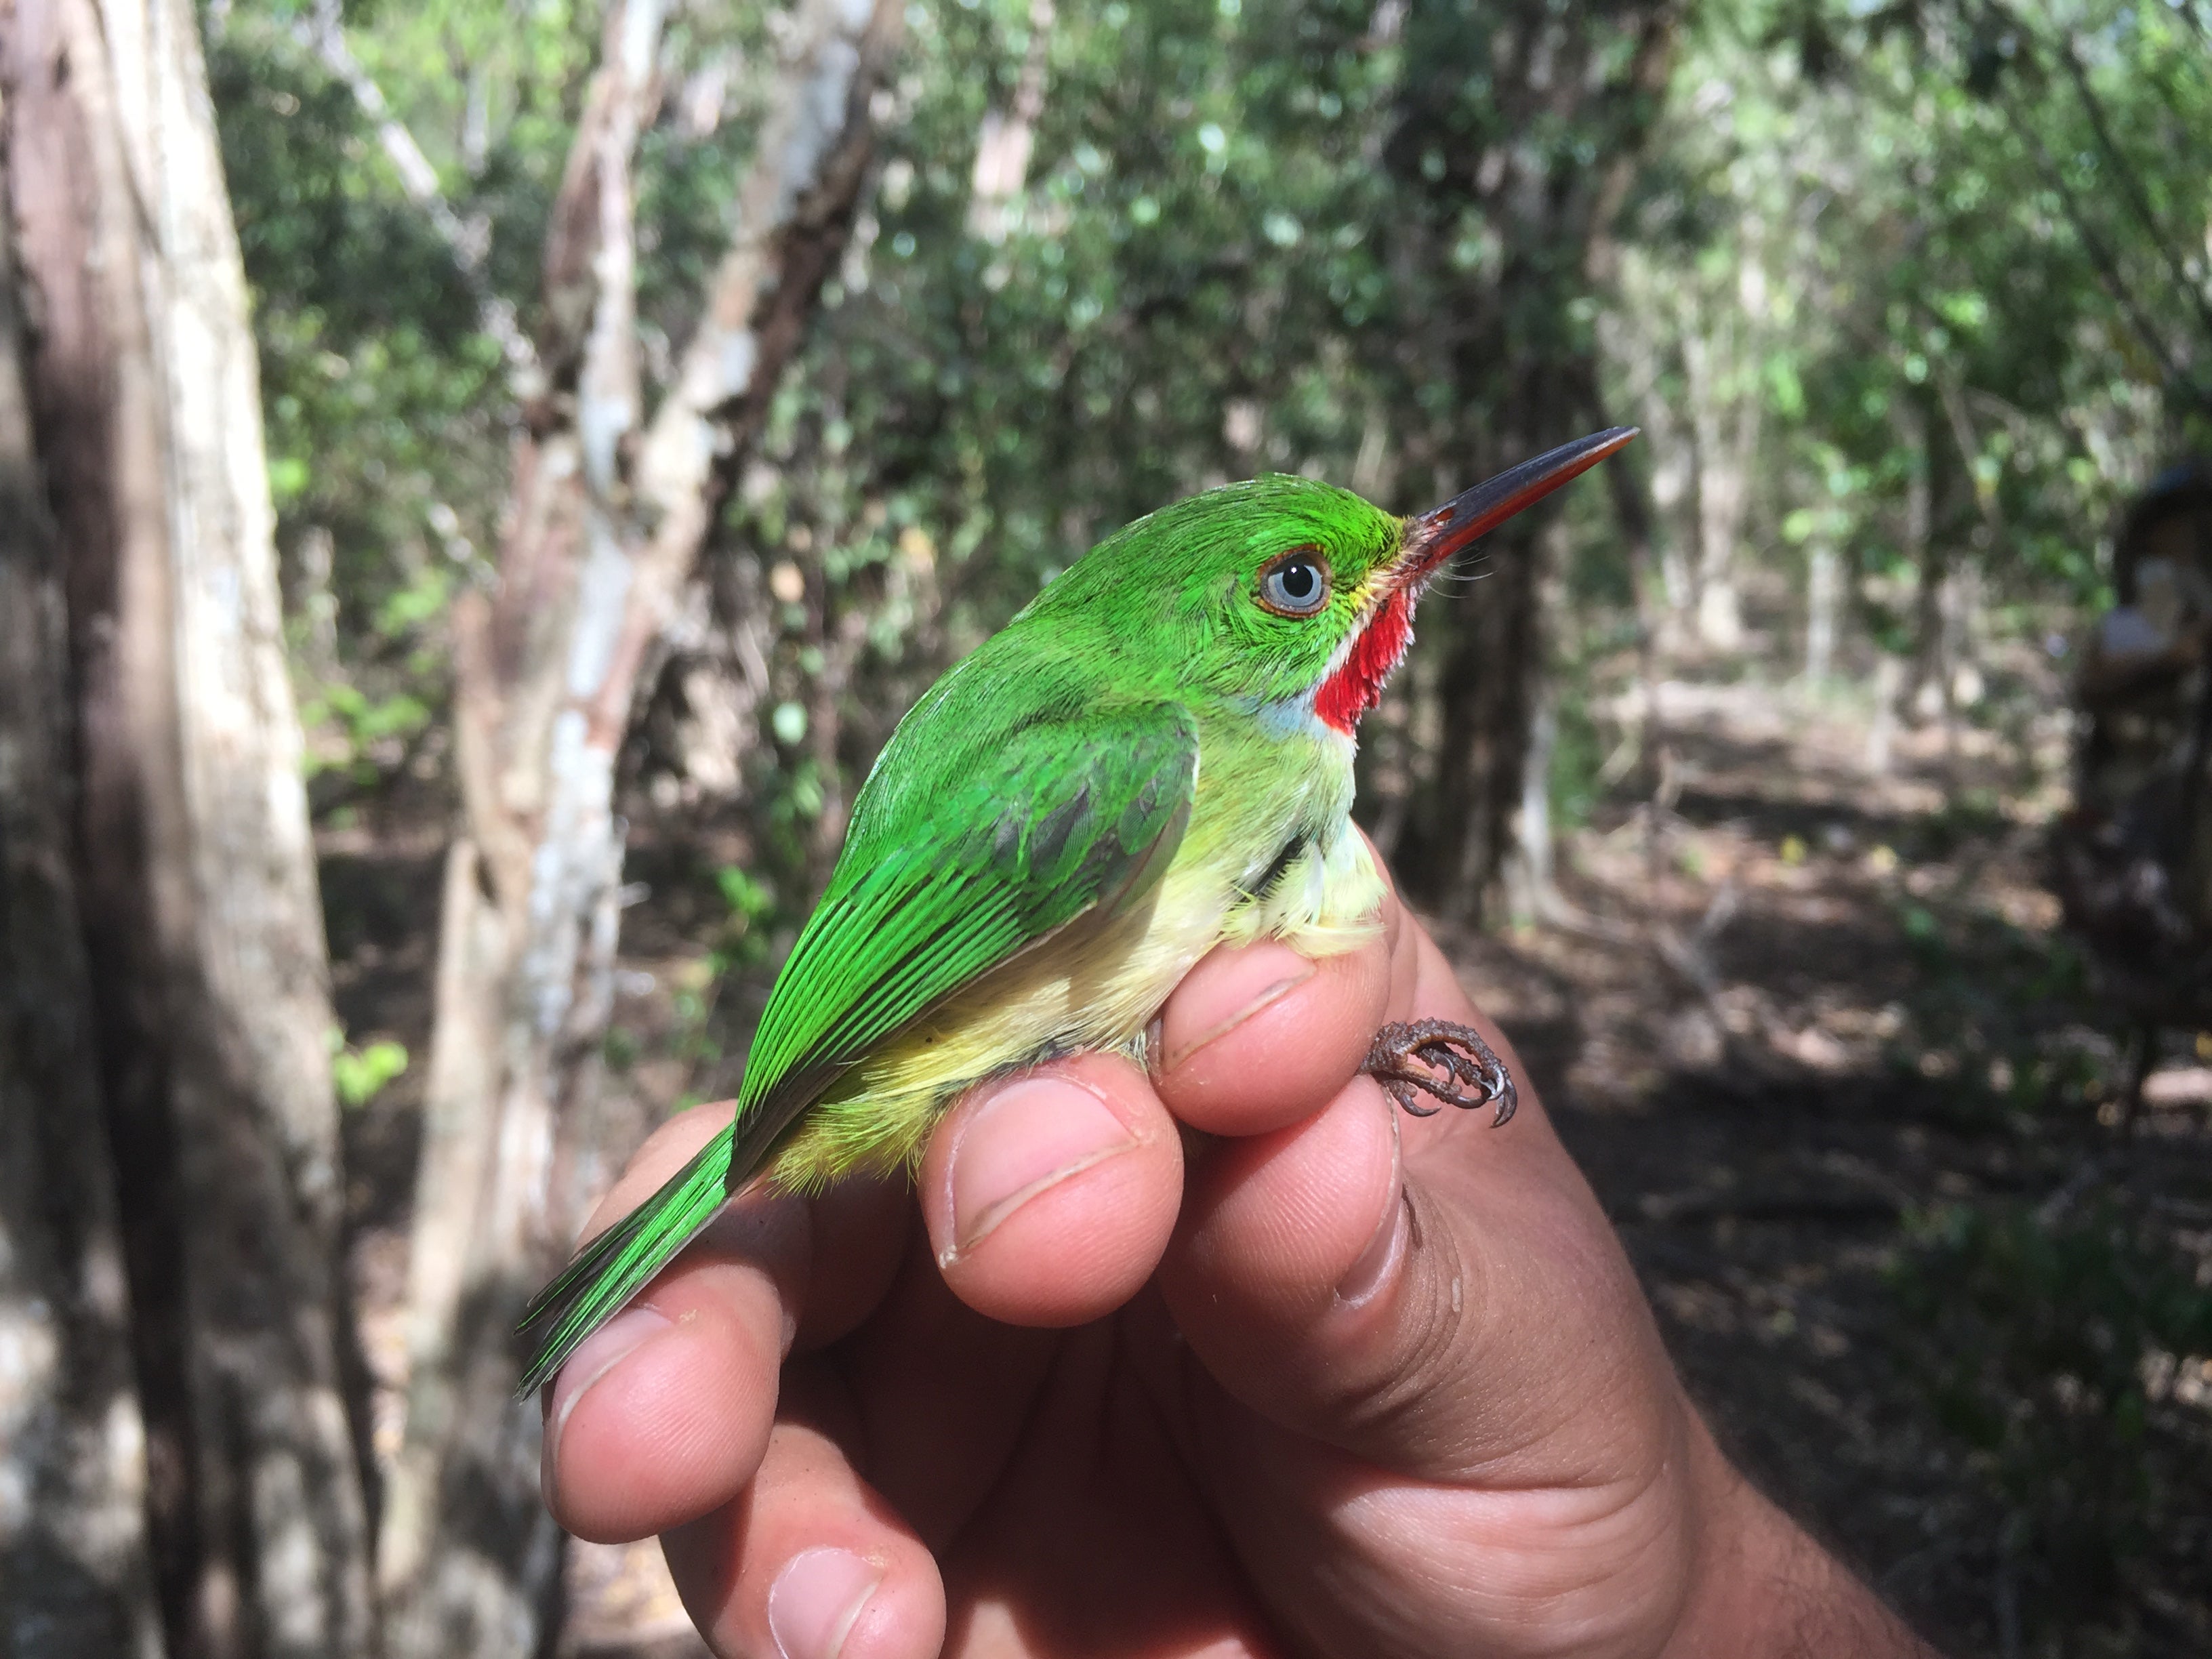 A green Jamaican tody in someone's hand